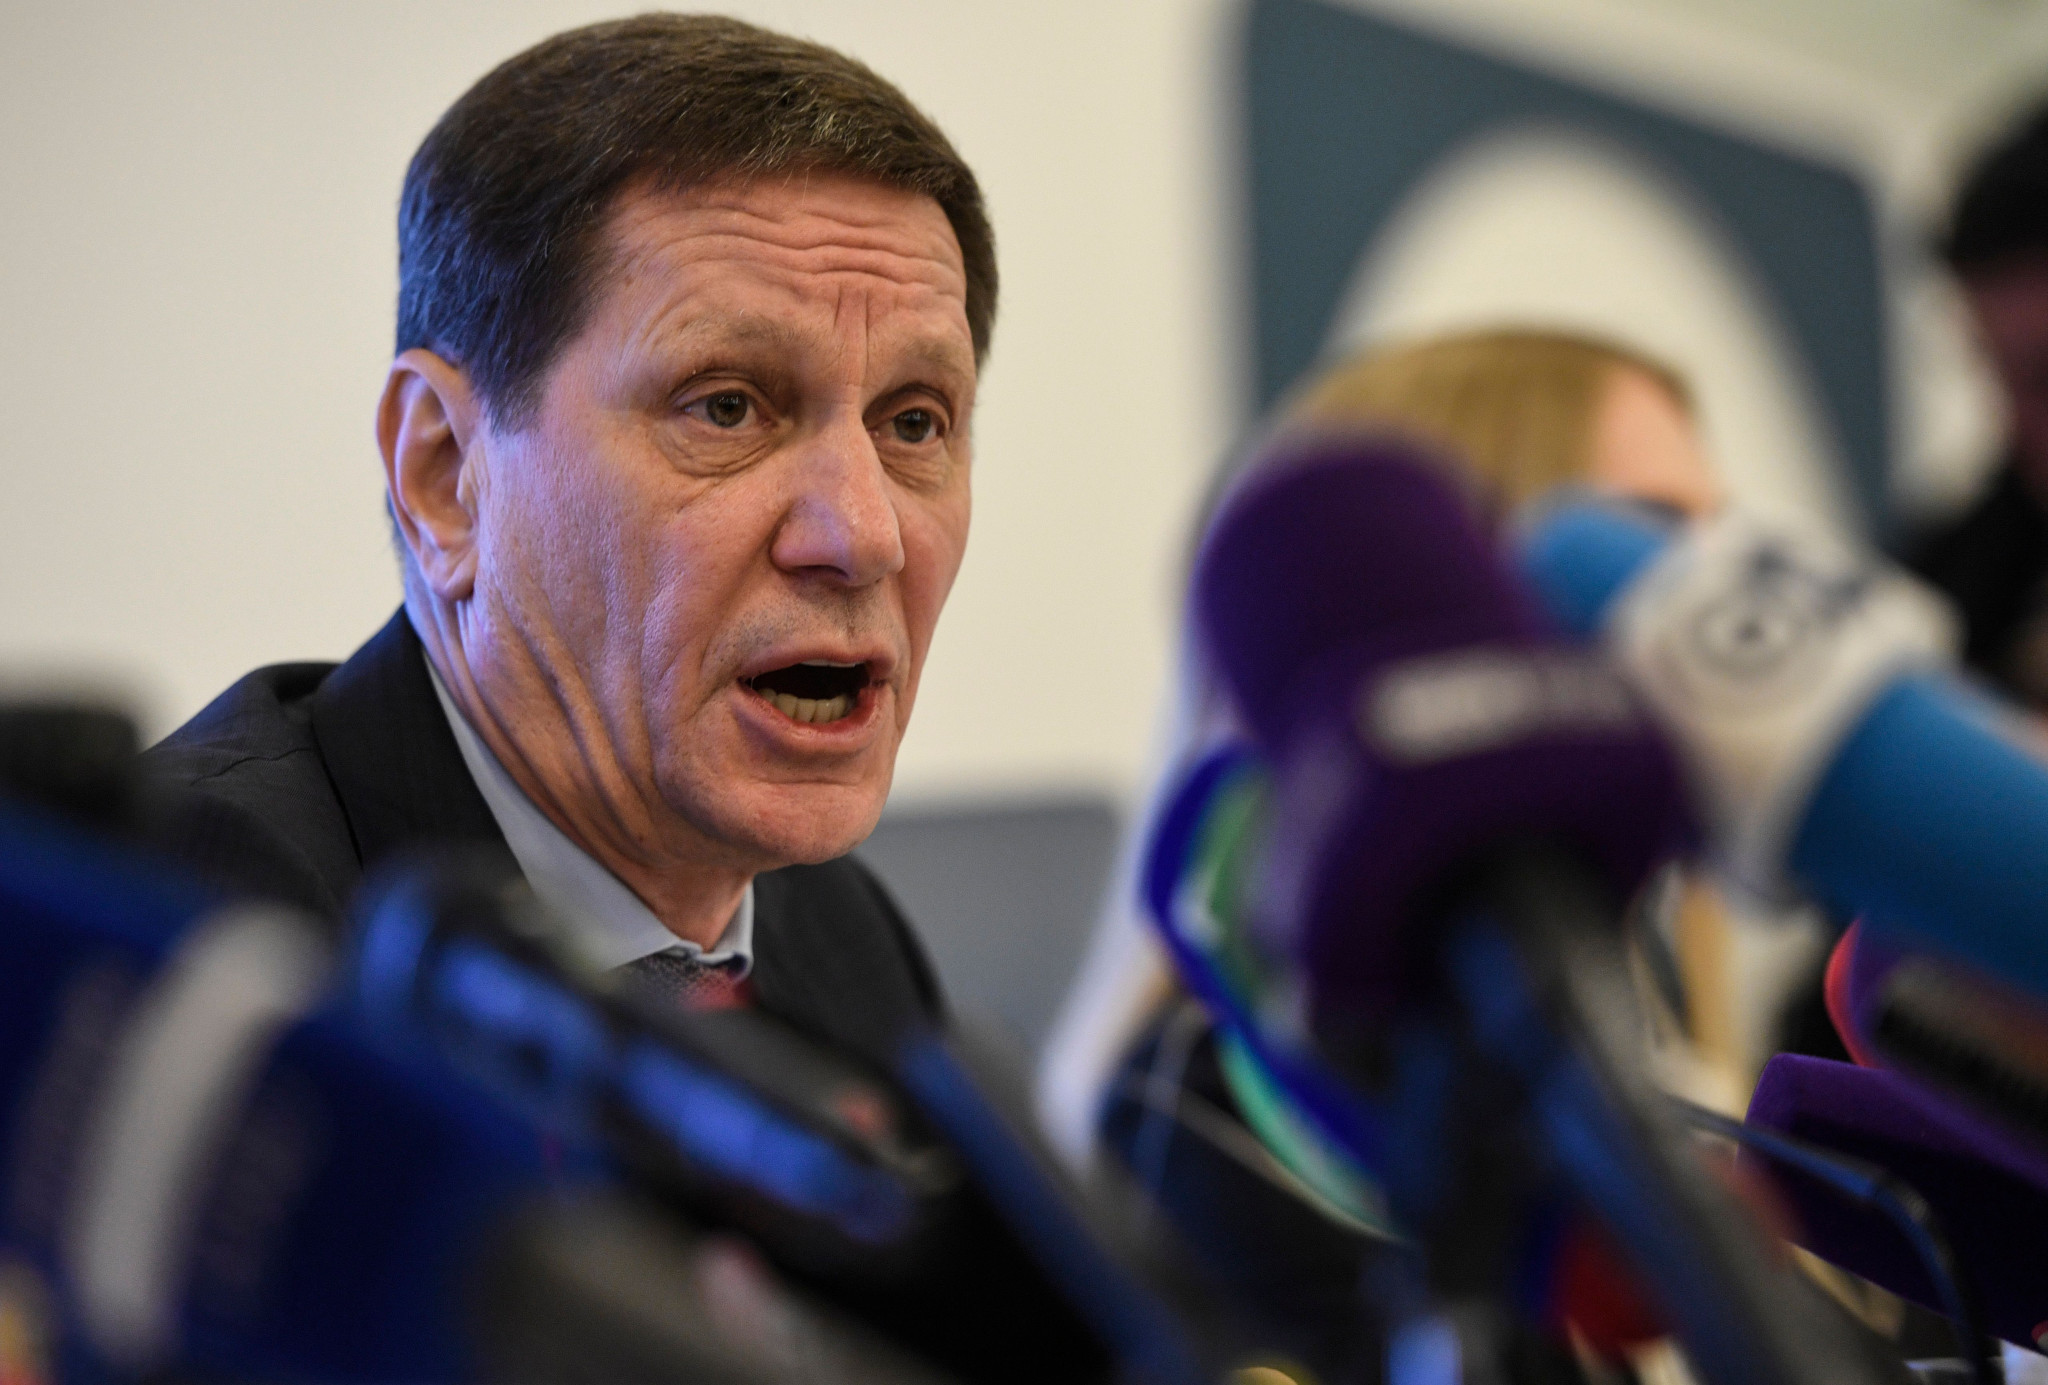 ROC President Alexander Zhukov has claimed the delay in the CAS verdicts will not have an adverse affect on athletes cleared to compete ©Getty Images